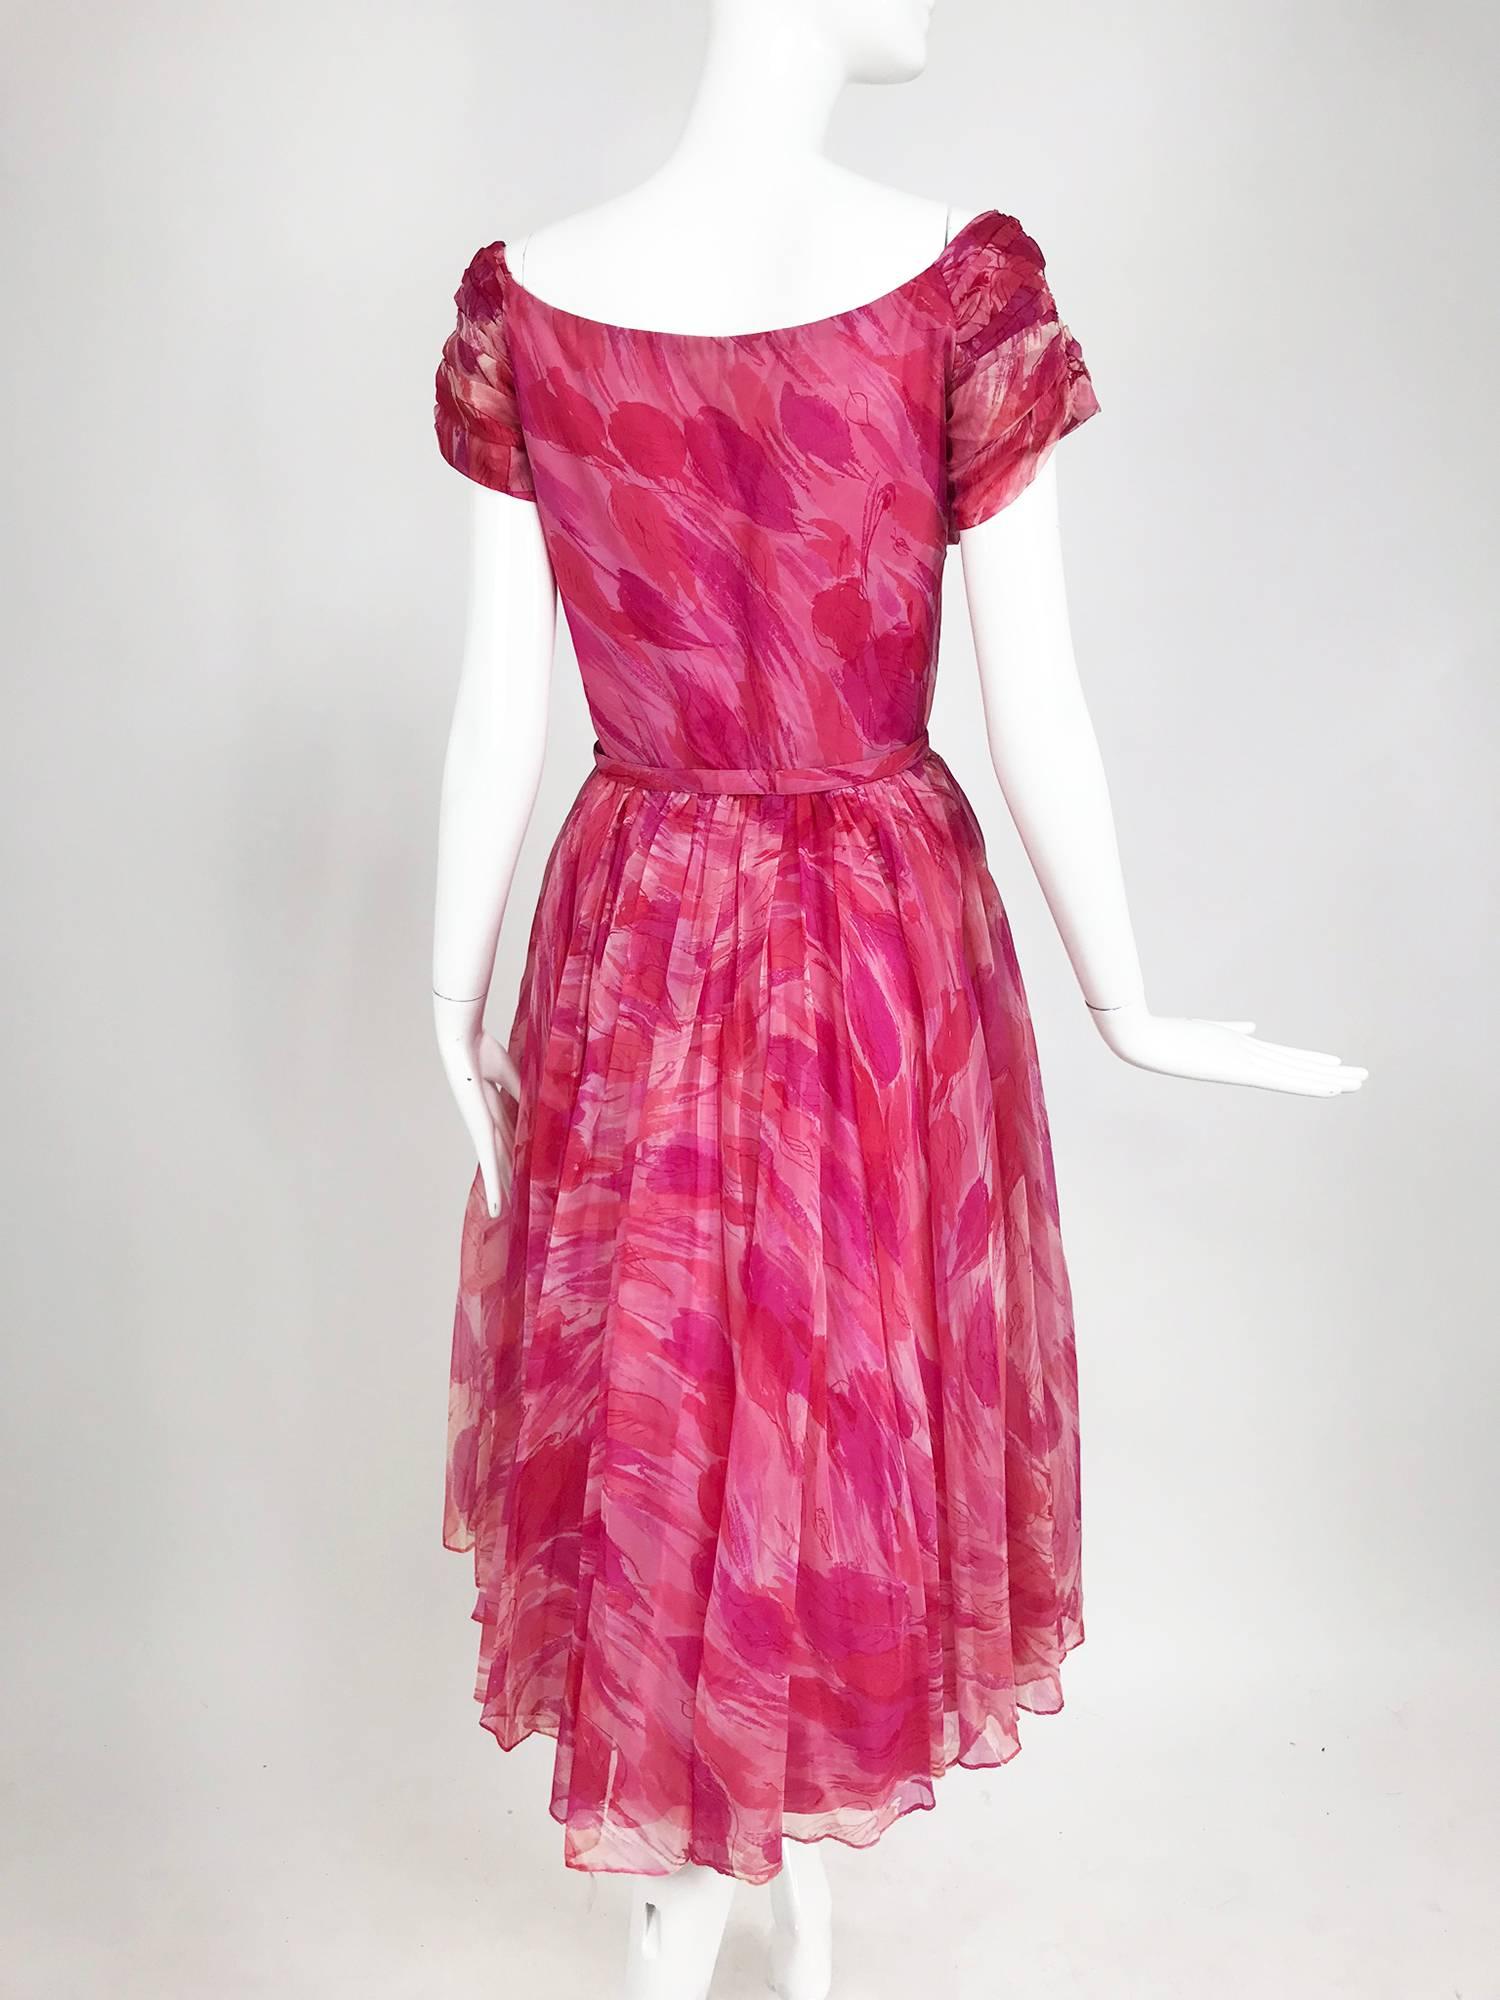 Women's Hot pink modernist floral print off the shoulder early 1960s organza dress